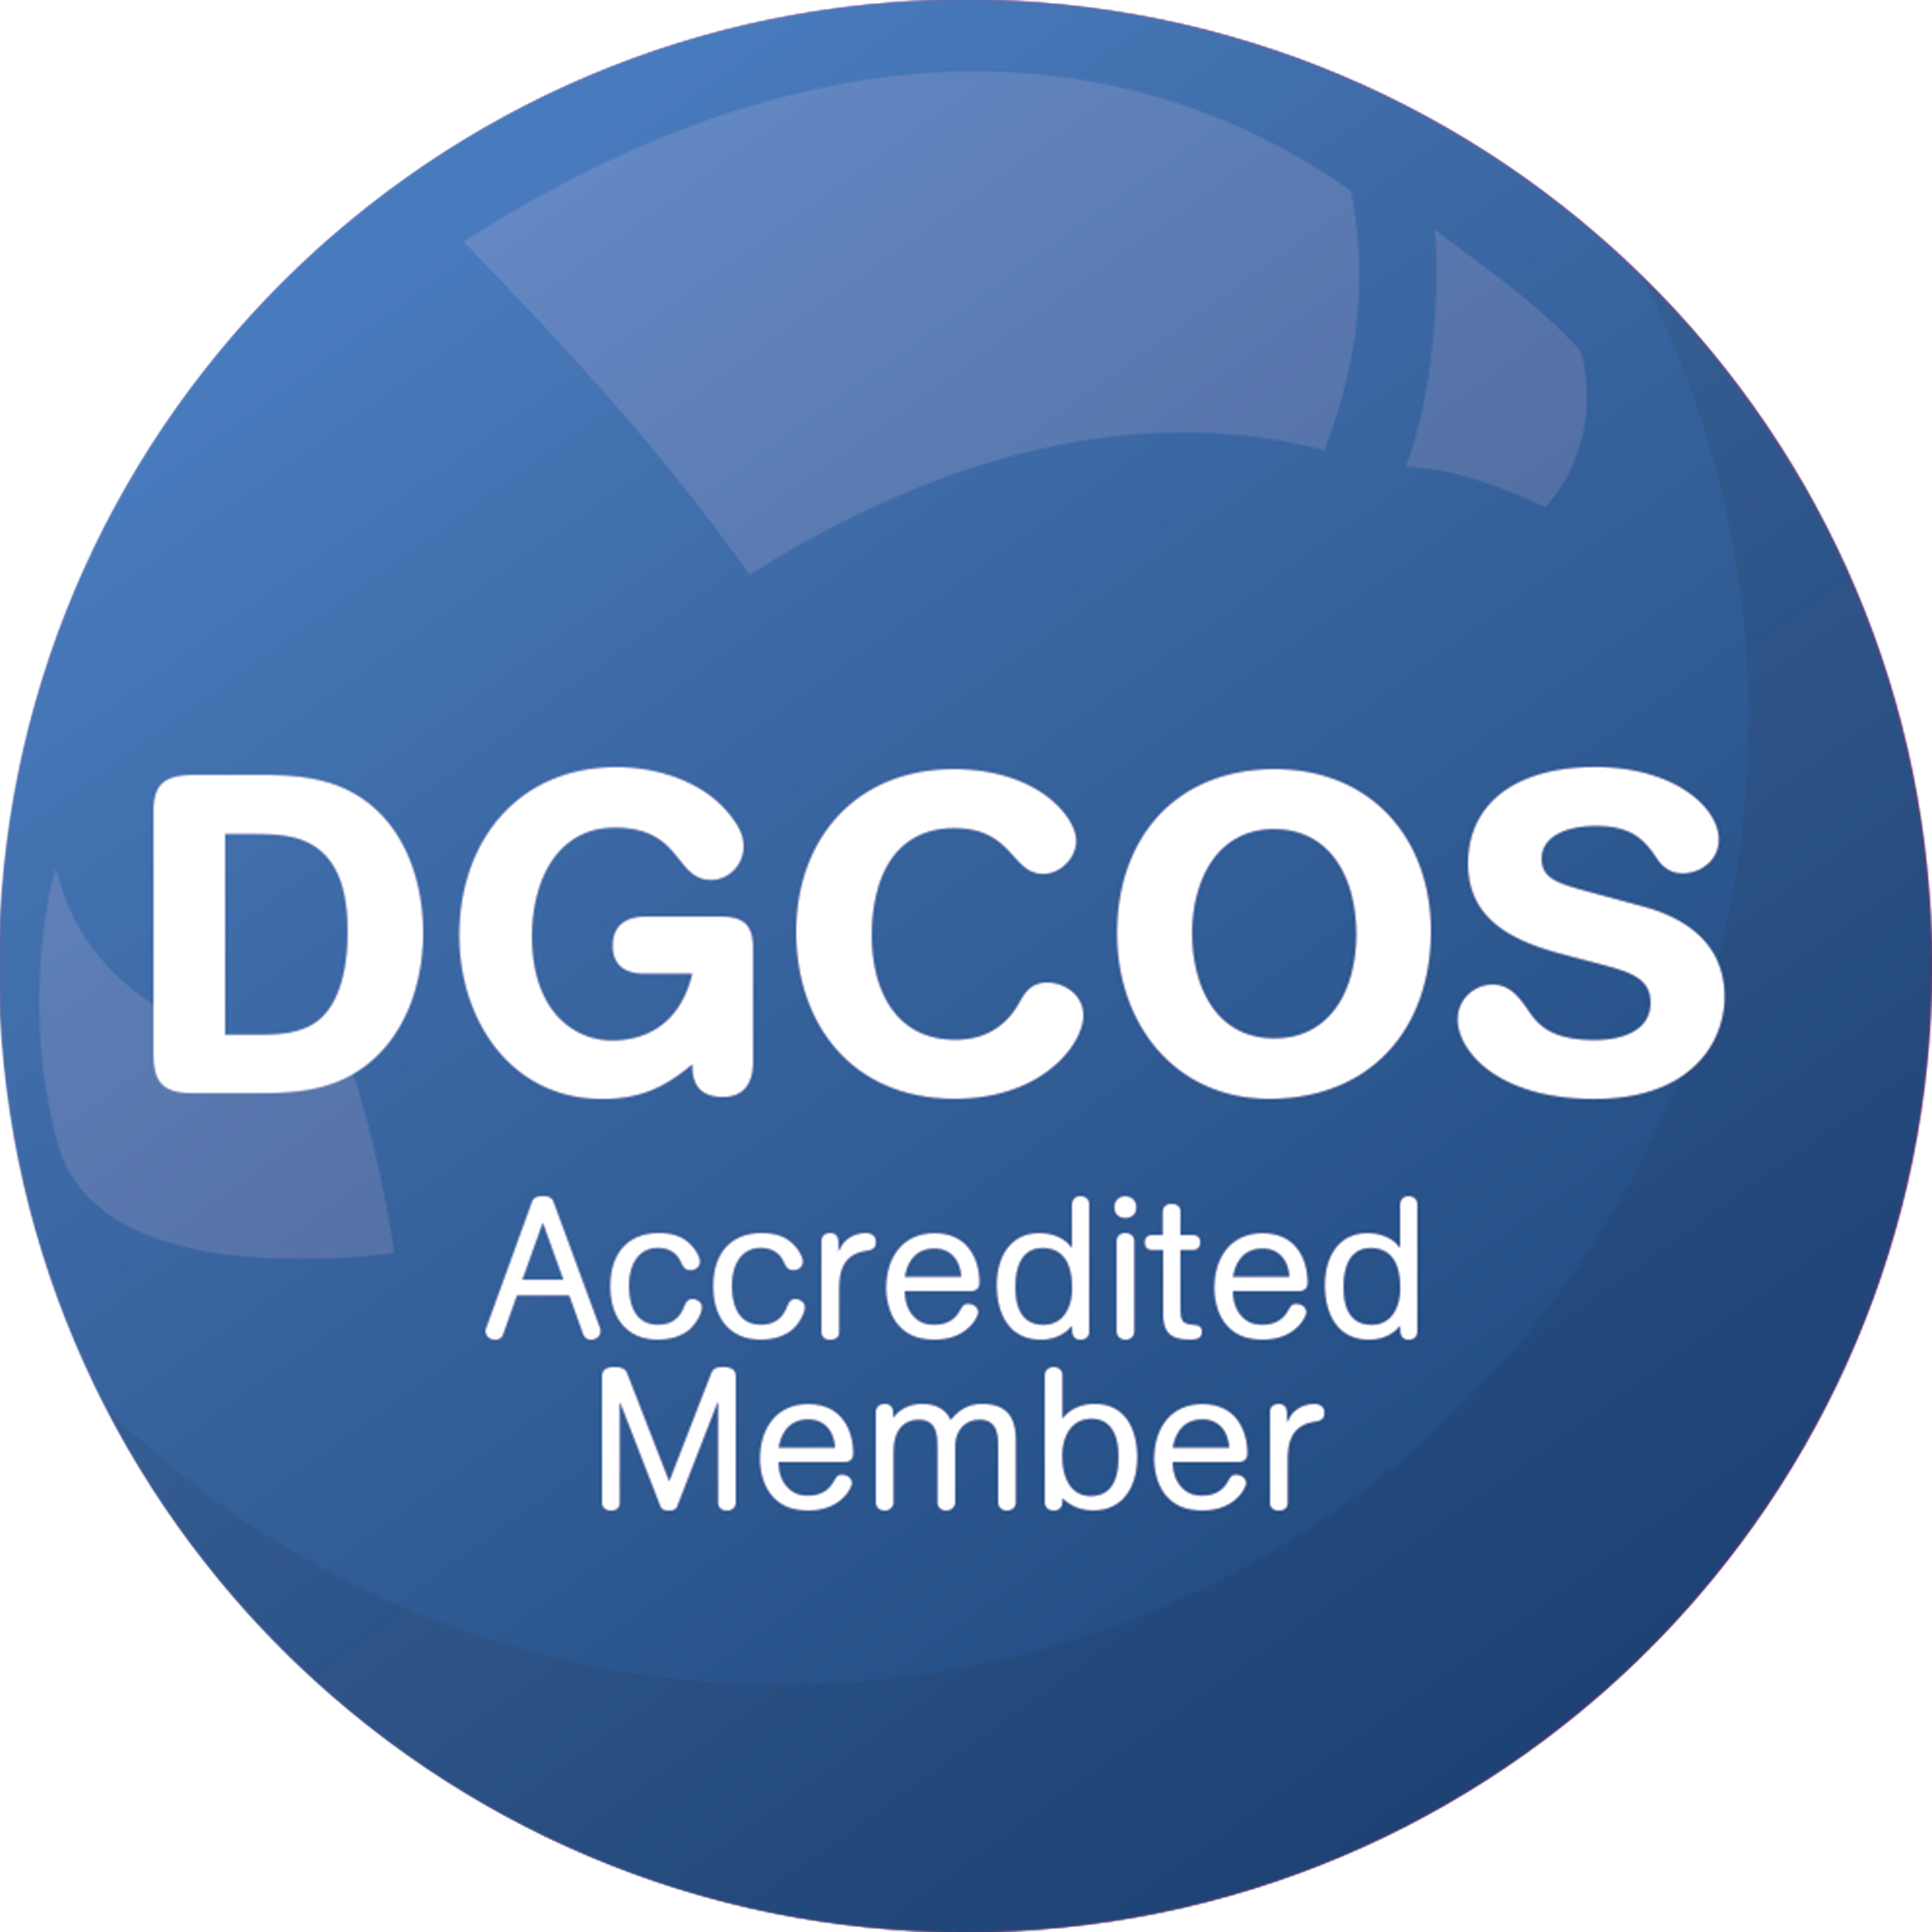 DGCOS-Accredited-Member-ADD-TO-SITE